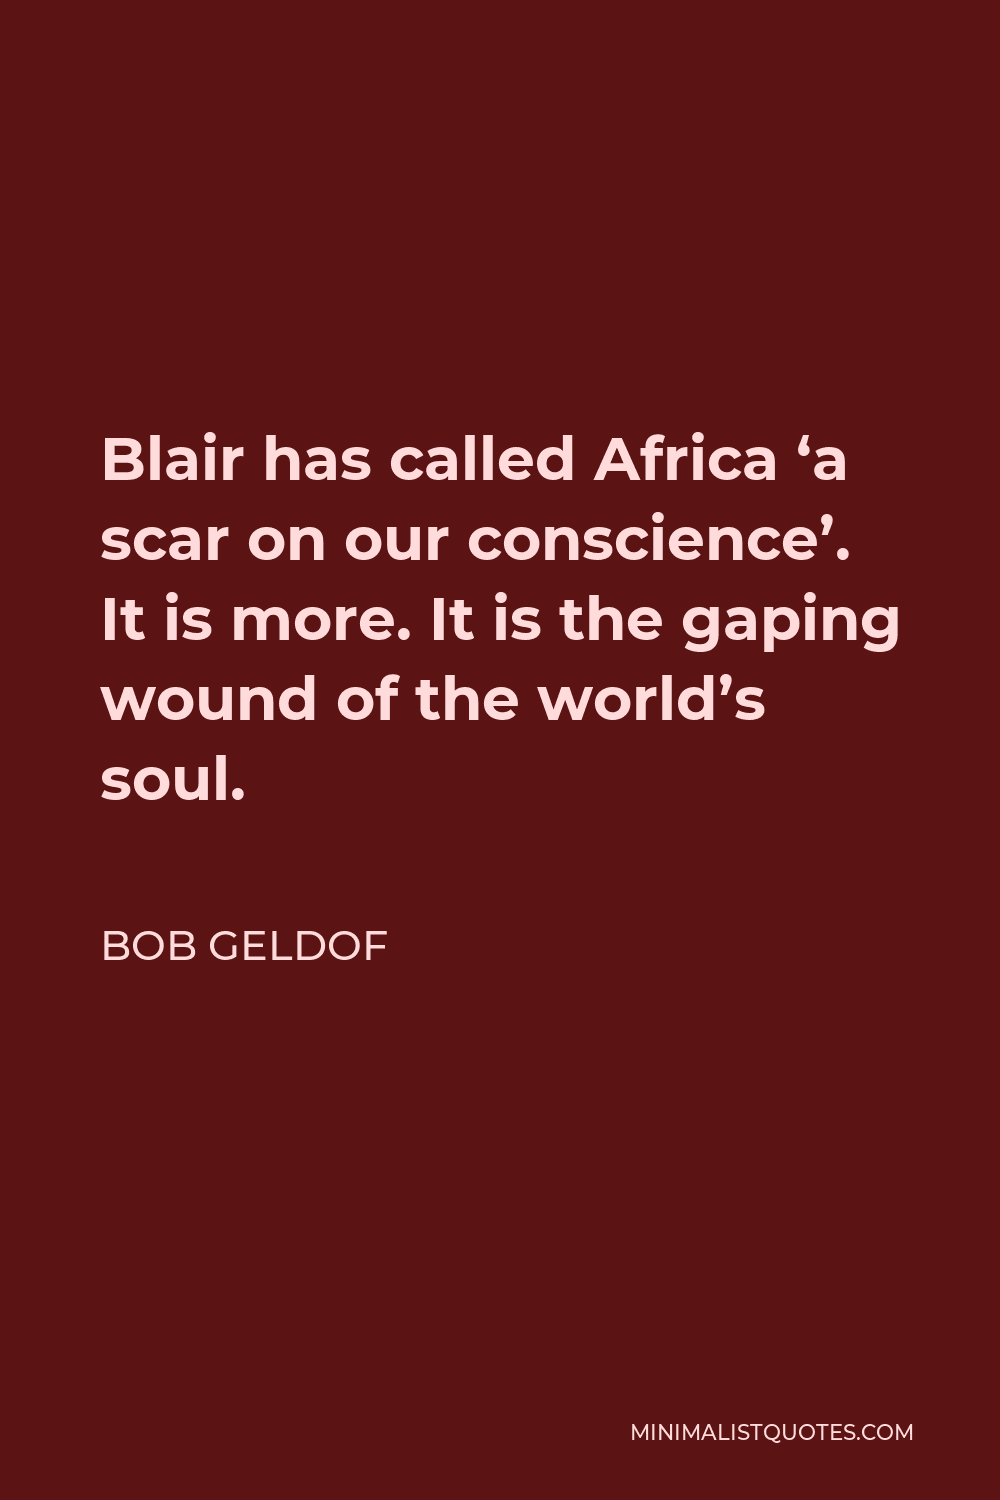 Bob Geldof Quote - Blair has called Africa ‘a scar on our conscience’. It is more. It is the gaping wound of the world’s soul.